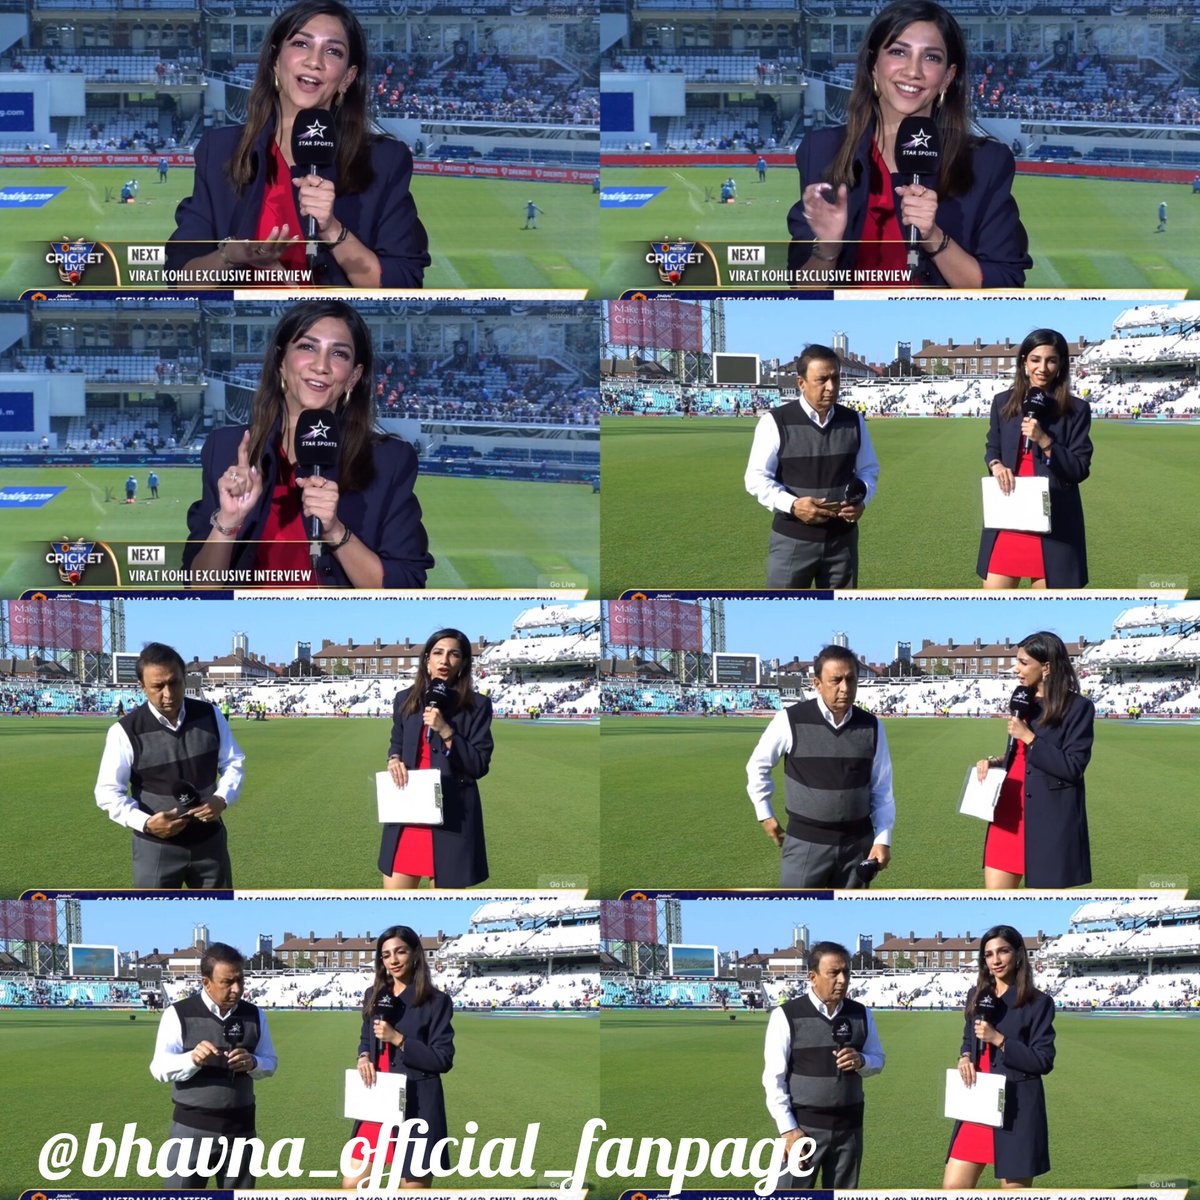 .@Bhavna__B D2: The Ultimate Test in English hosted by d Beauty Queen👑Bhavna in Gorgeous Red luk♥️🥰😇😍😘👰💞💓💝💗💖💟💘
#vjbhavna
#ShowDiaries
#MyBeautyQueenBhavs
#meninblue
#indiancricketteam
#cricketpresenter
#INDvsAUS
#JindalPanthercricketlive
#testcricket
#starsportsindia